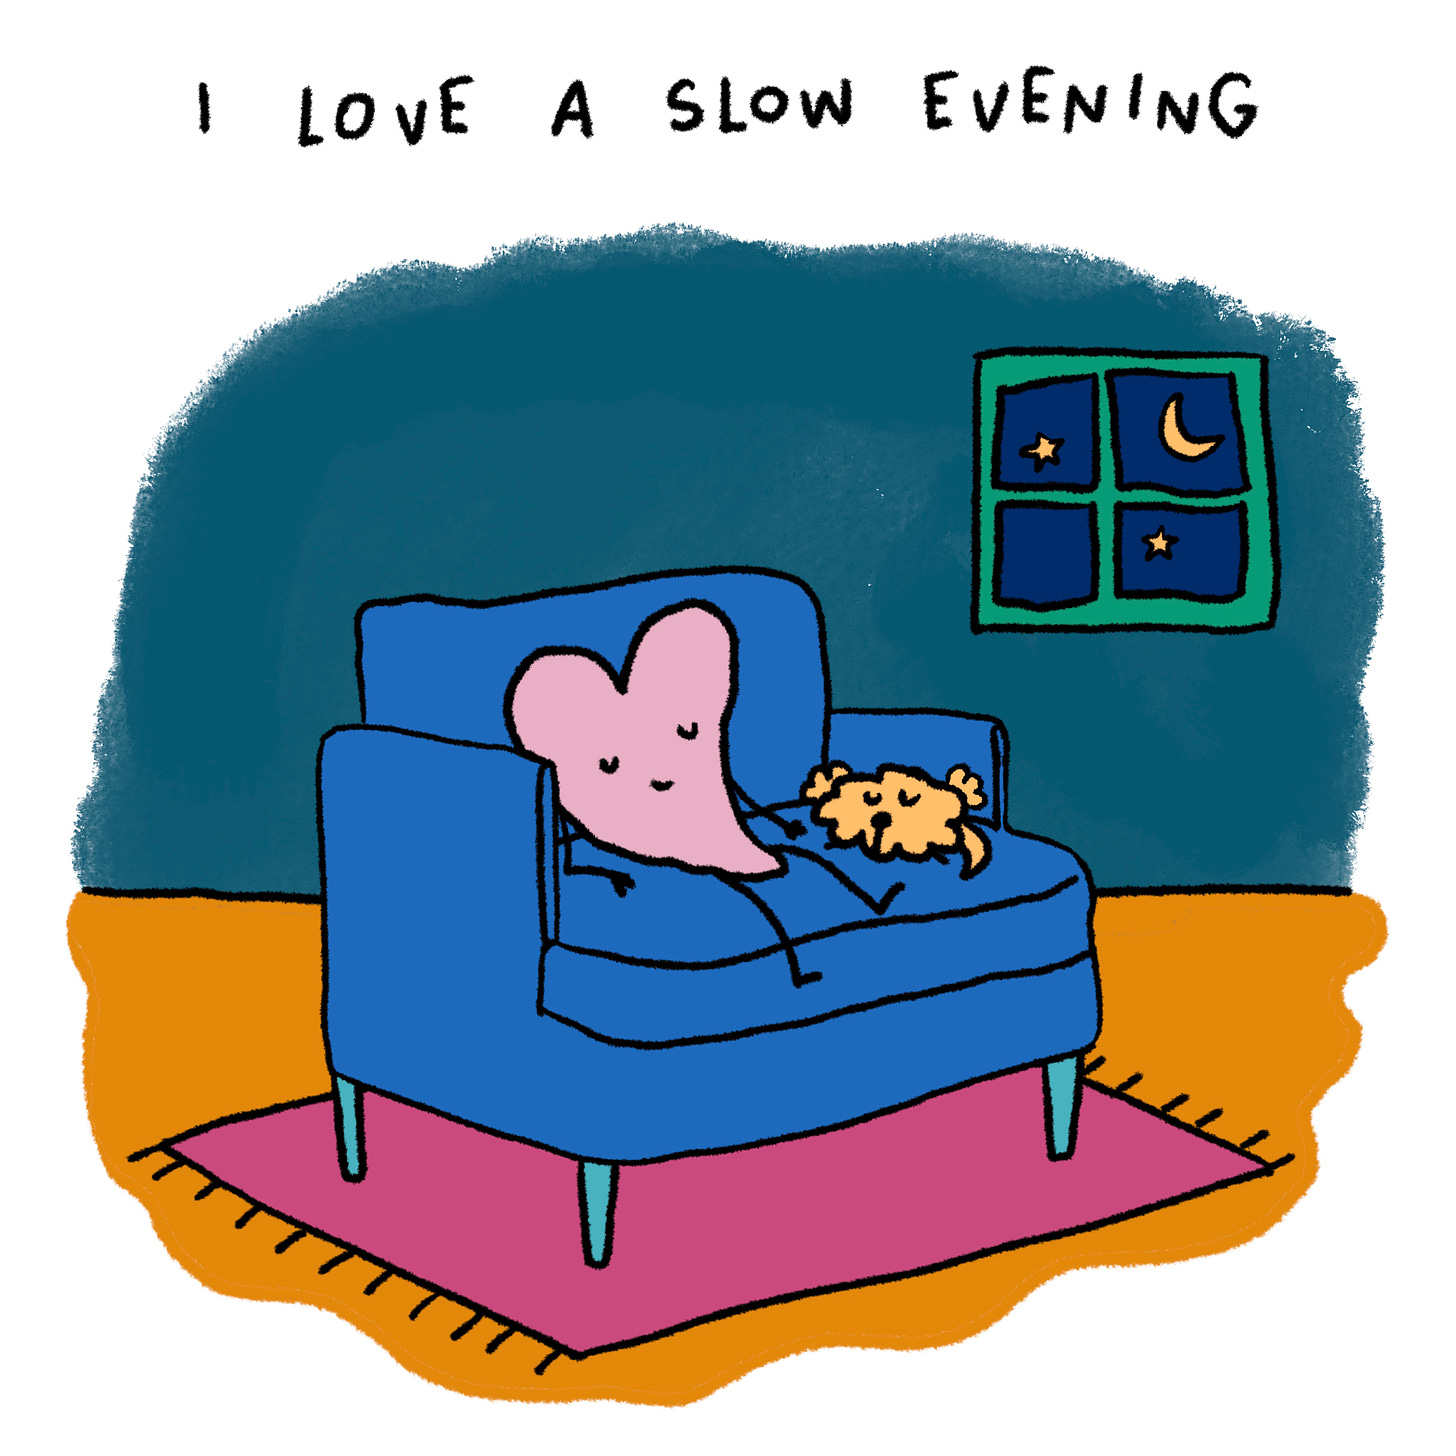 I love a slow evening